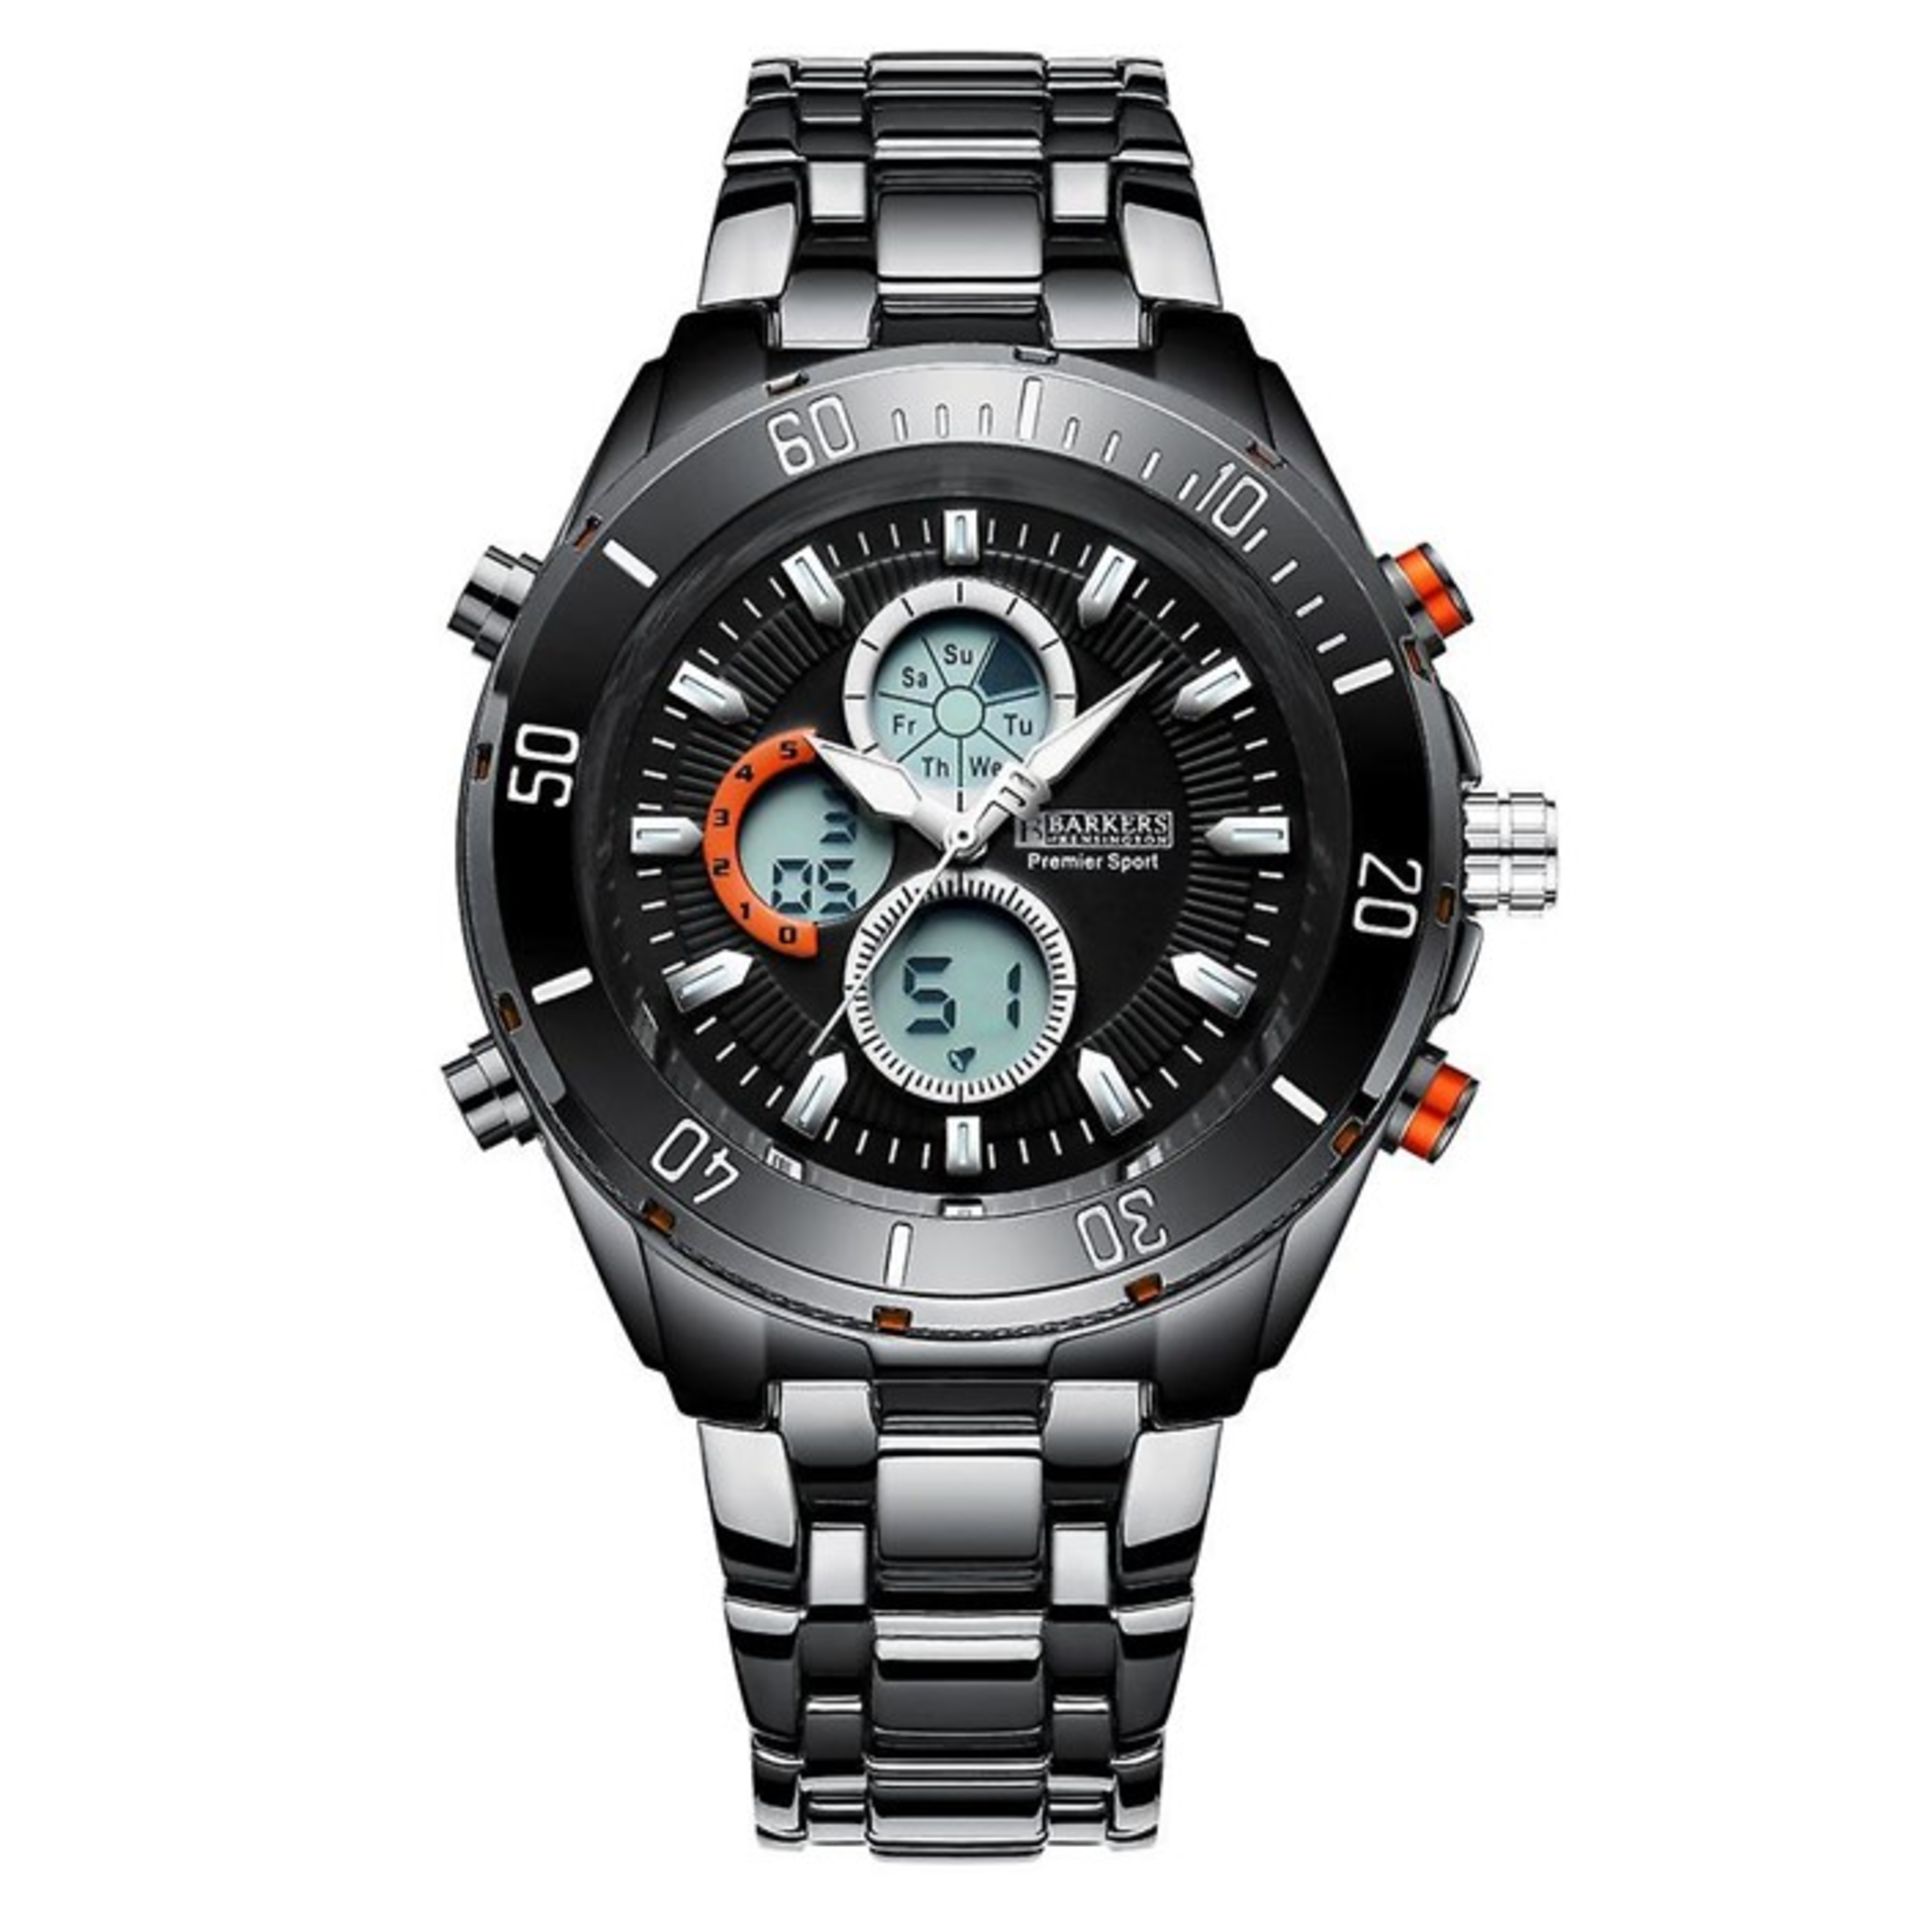 Barkers of Kensington Black Premier Sports watch, New & boxed with a 5 year warranty included